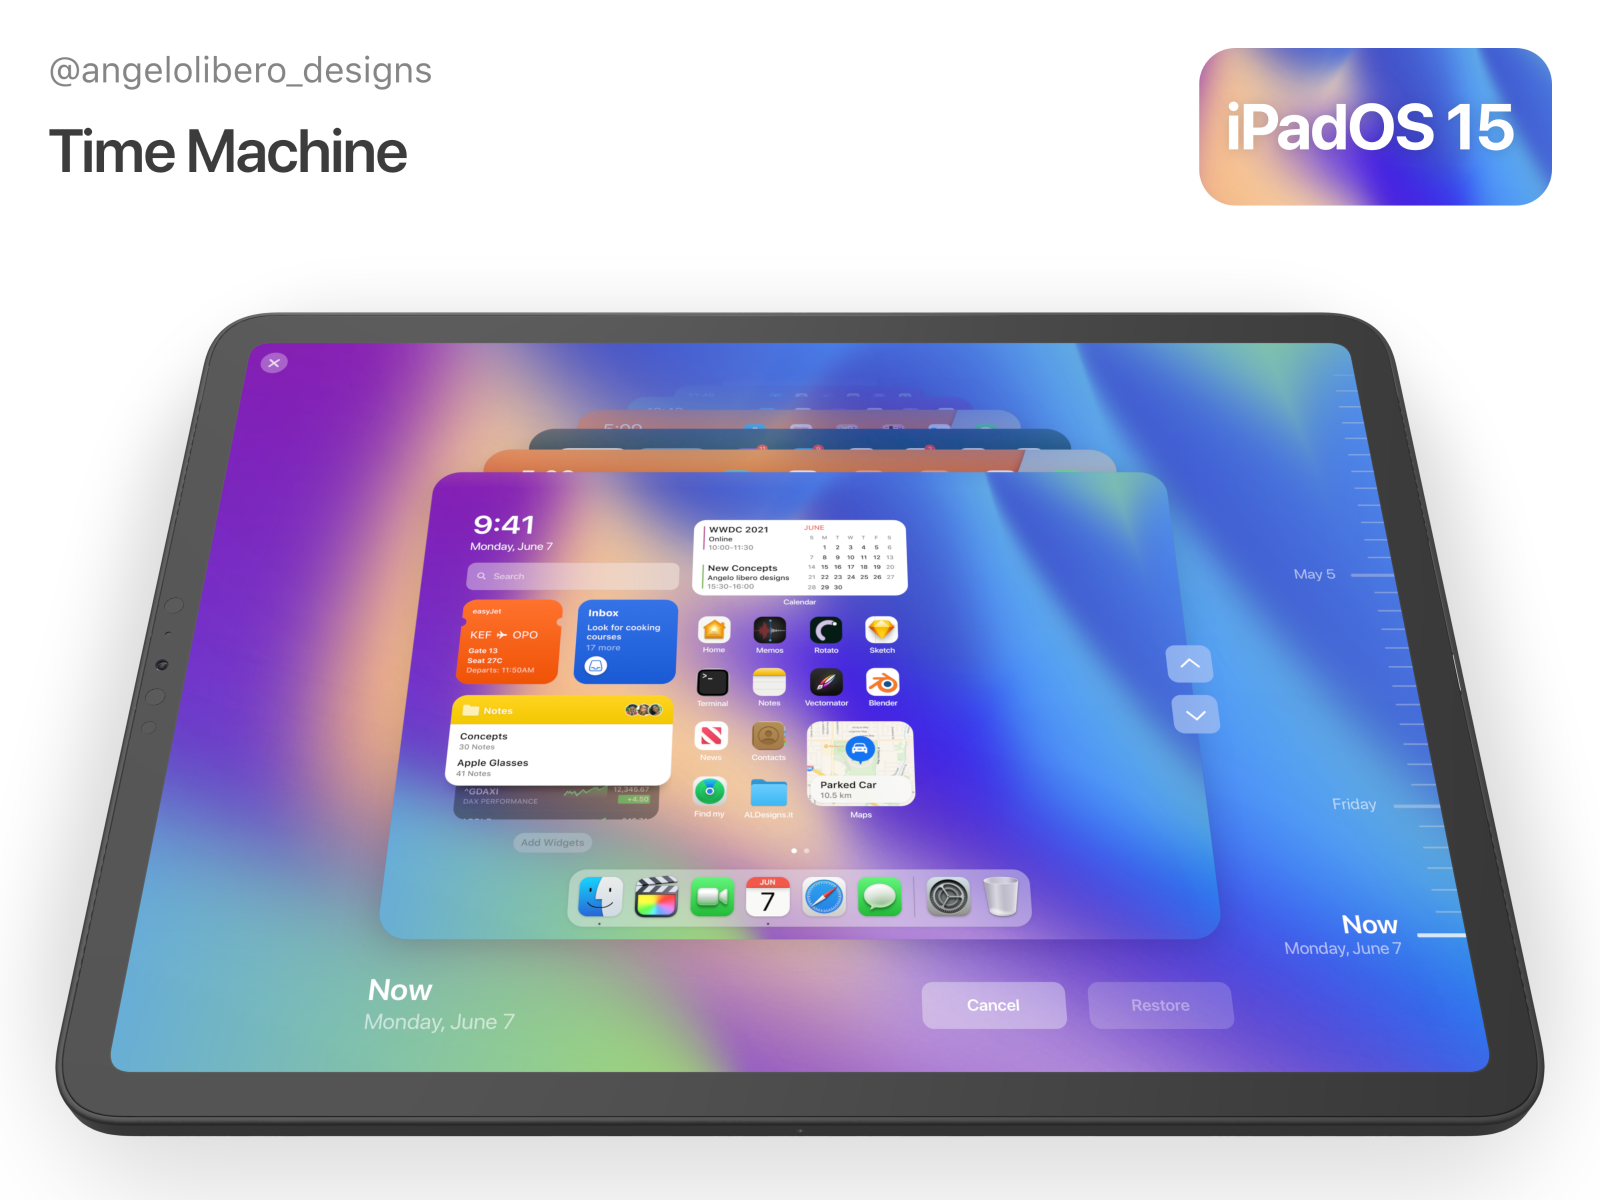 Time Machine for iPadOS 15 by Angelo Libero Designs on Dribbble